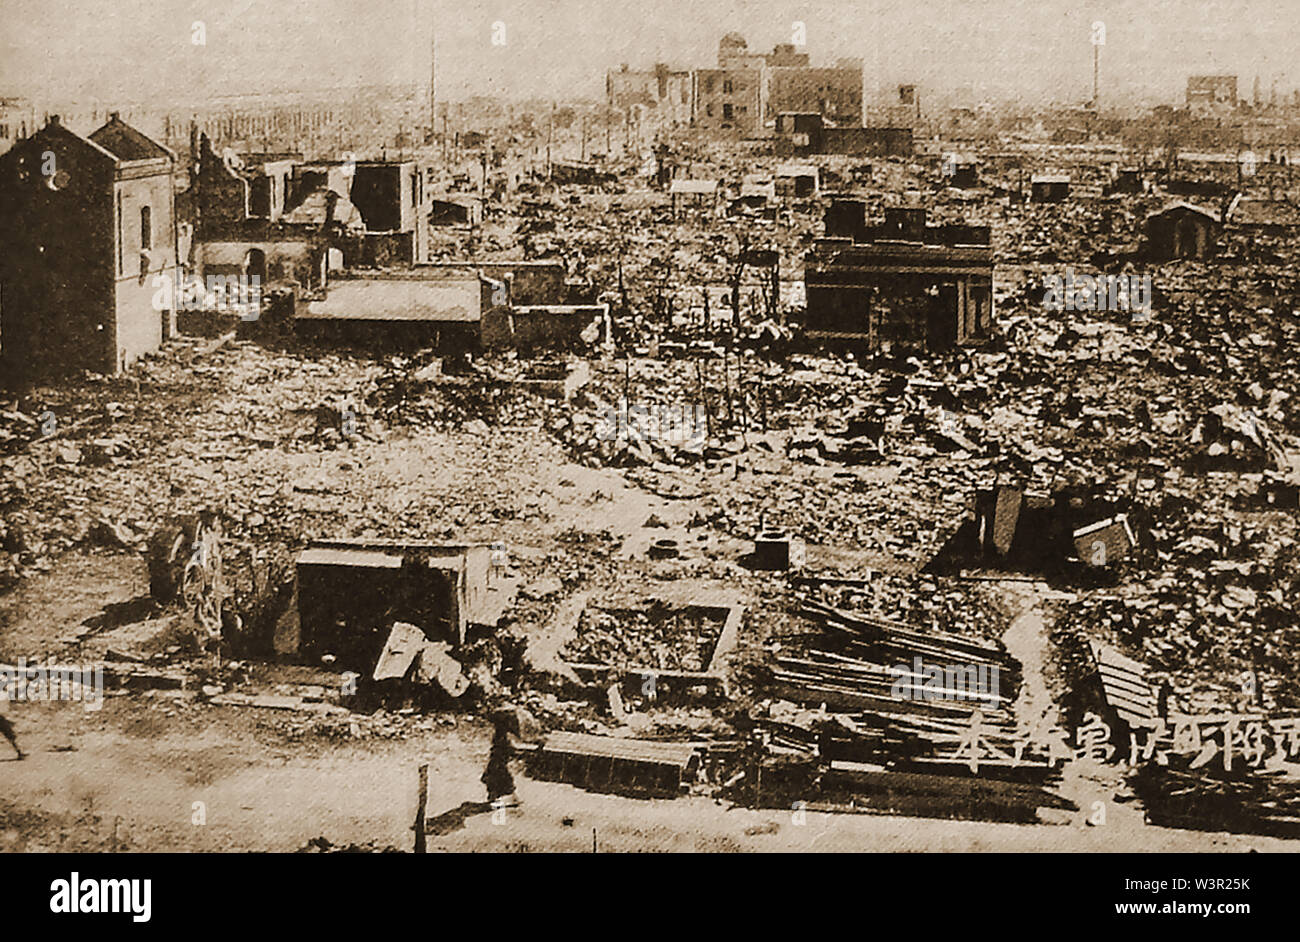 Scene in Tokyo after  the 1923 earthquake (Great Kantō Earthquake) -approx  100,000 deaths, 100,000 injured  and many burned or missing Stock Photo